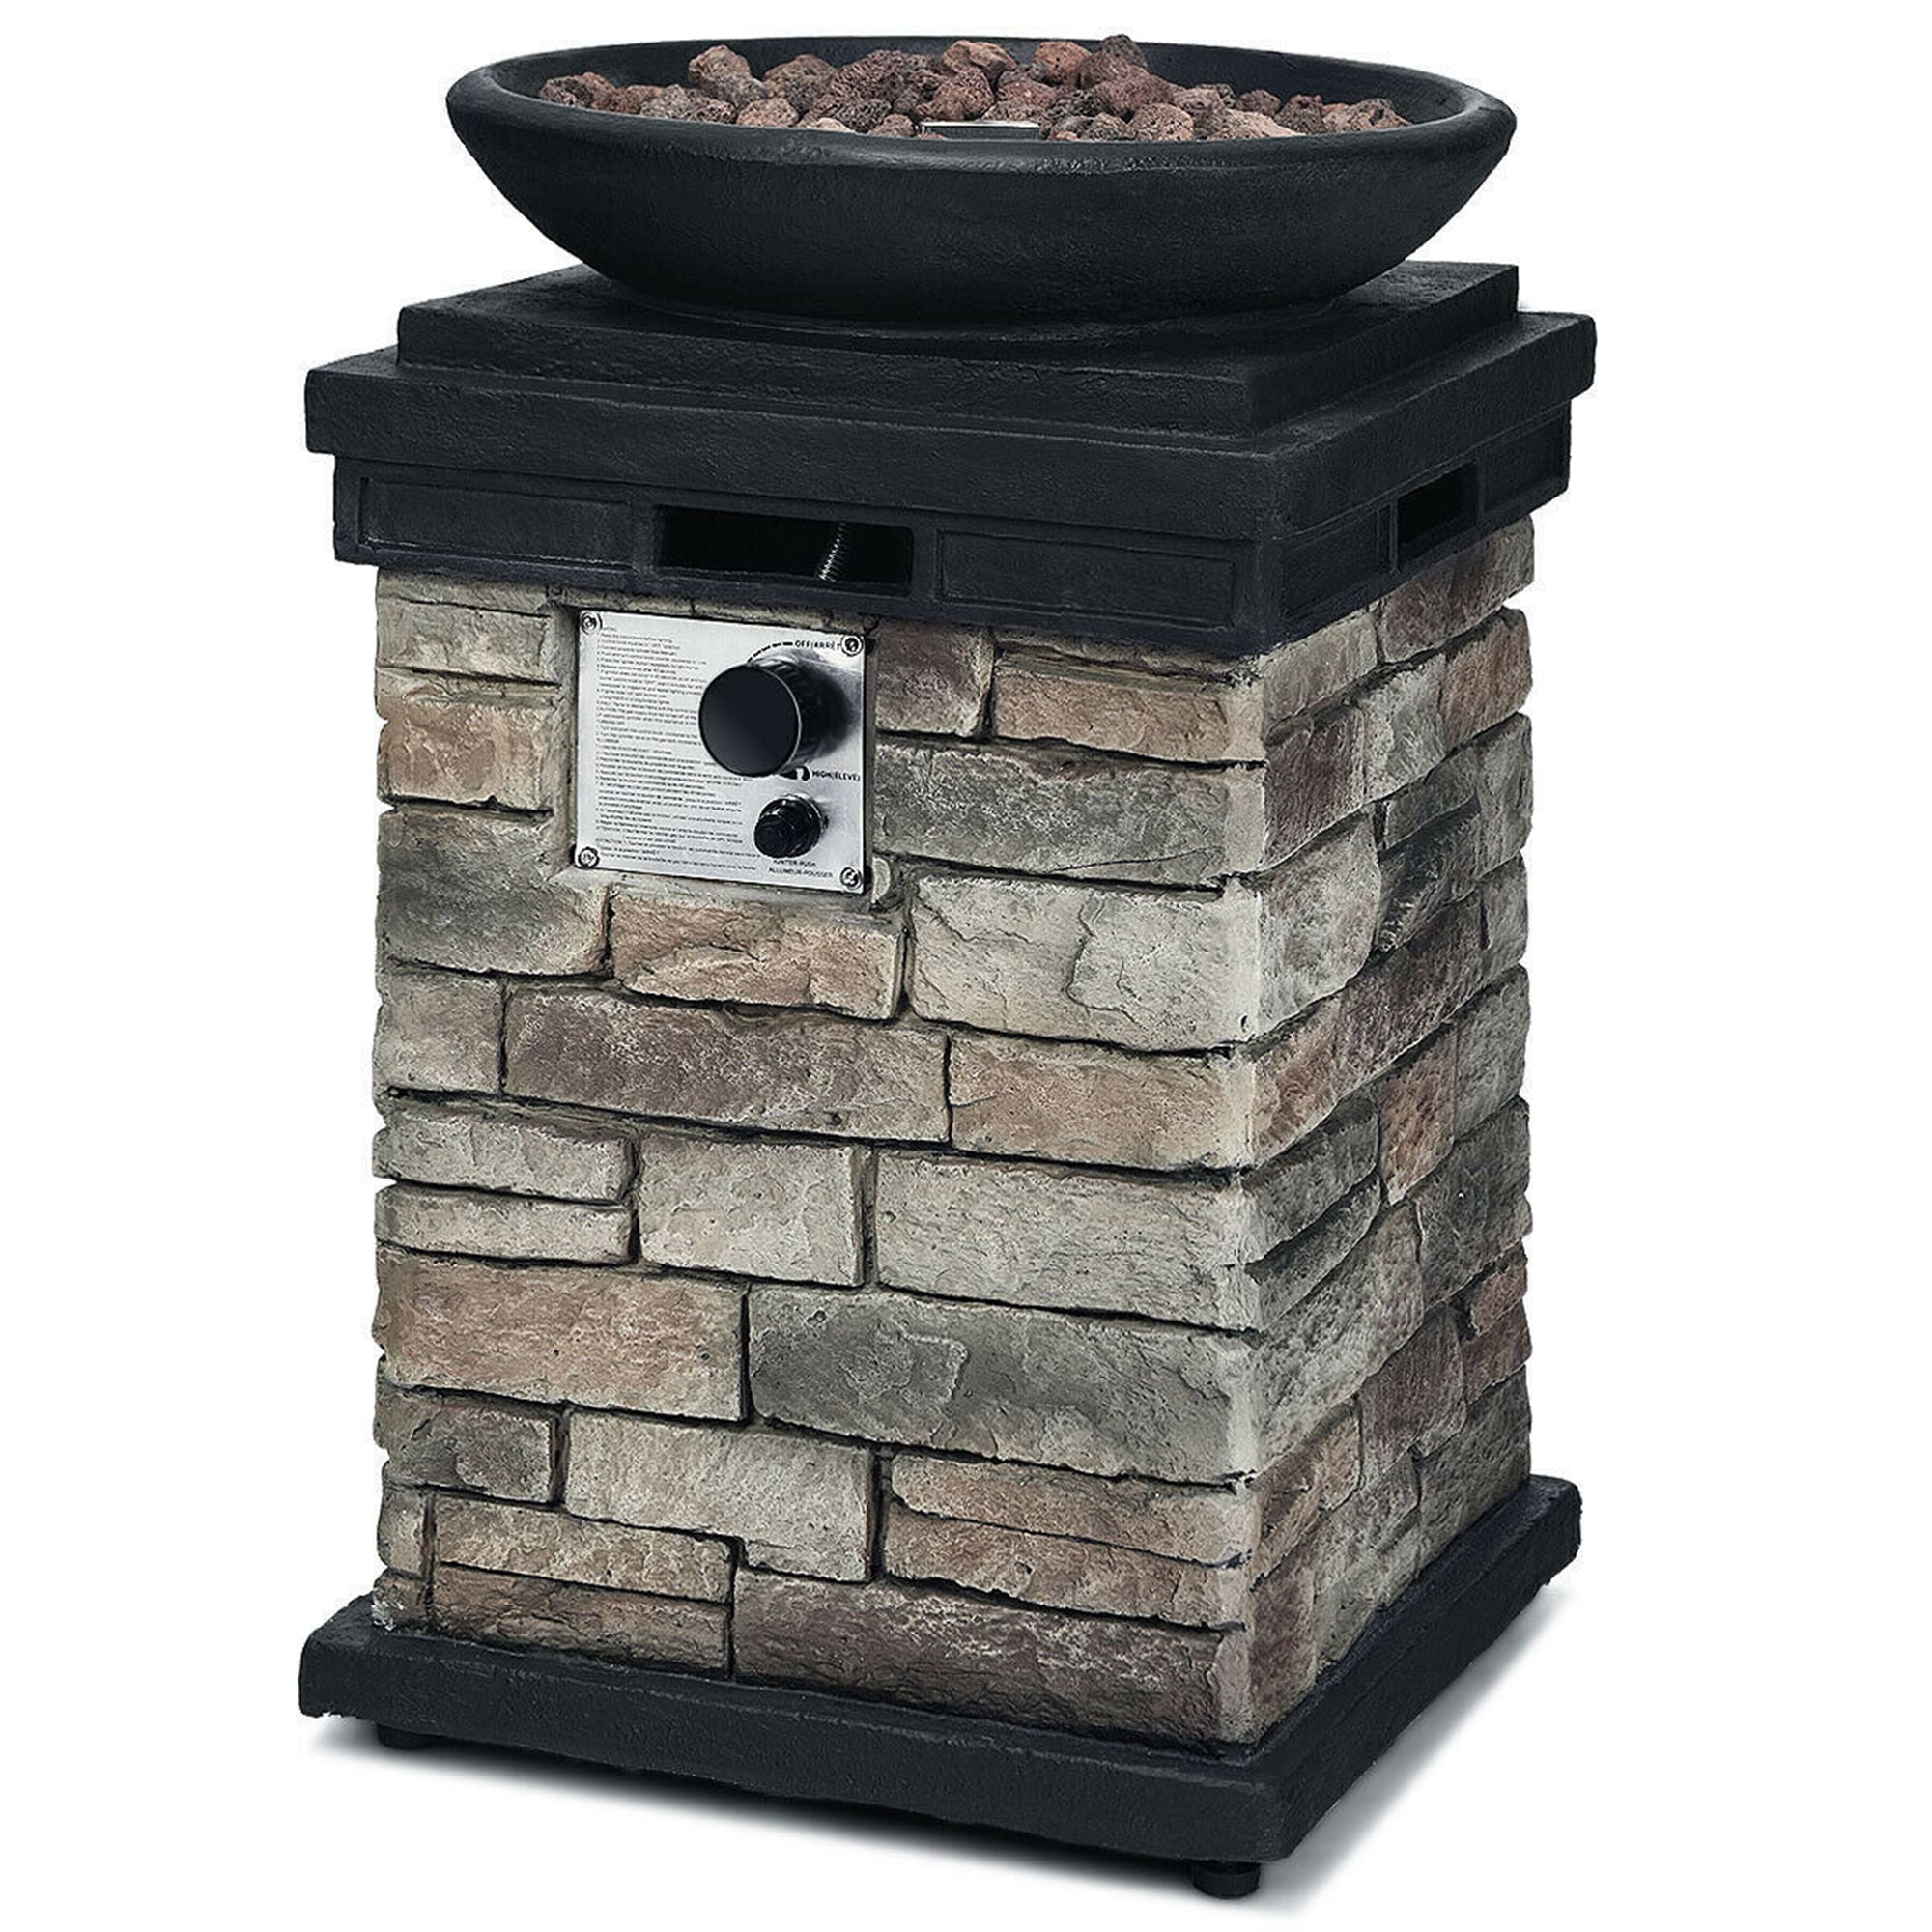 Details about   35" Black Steel Large Rectangular Outdoor Wood Fire Pit w/ Cooking Grate Poker 